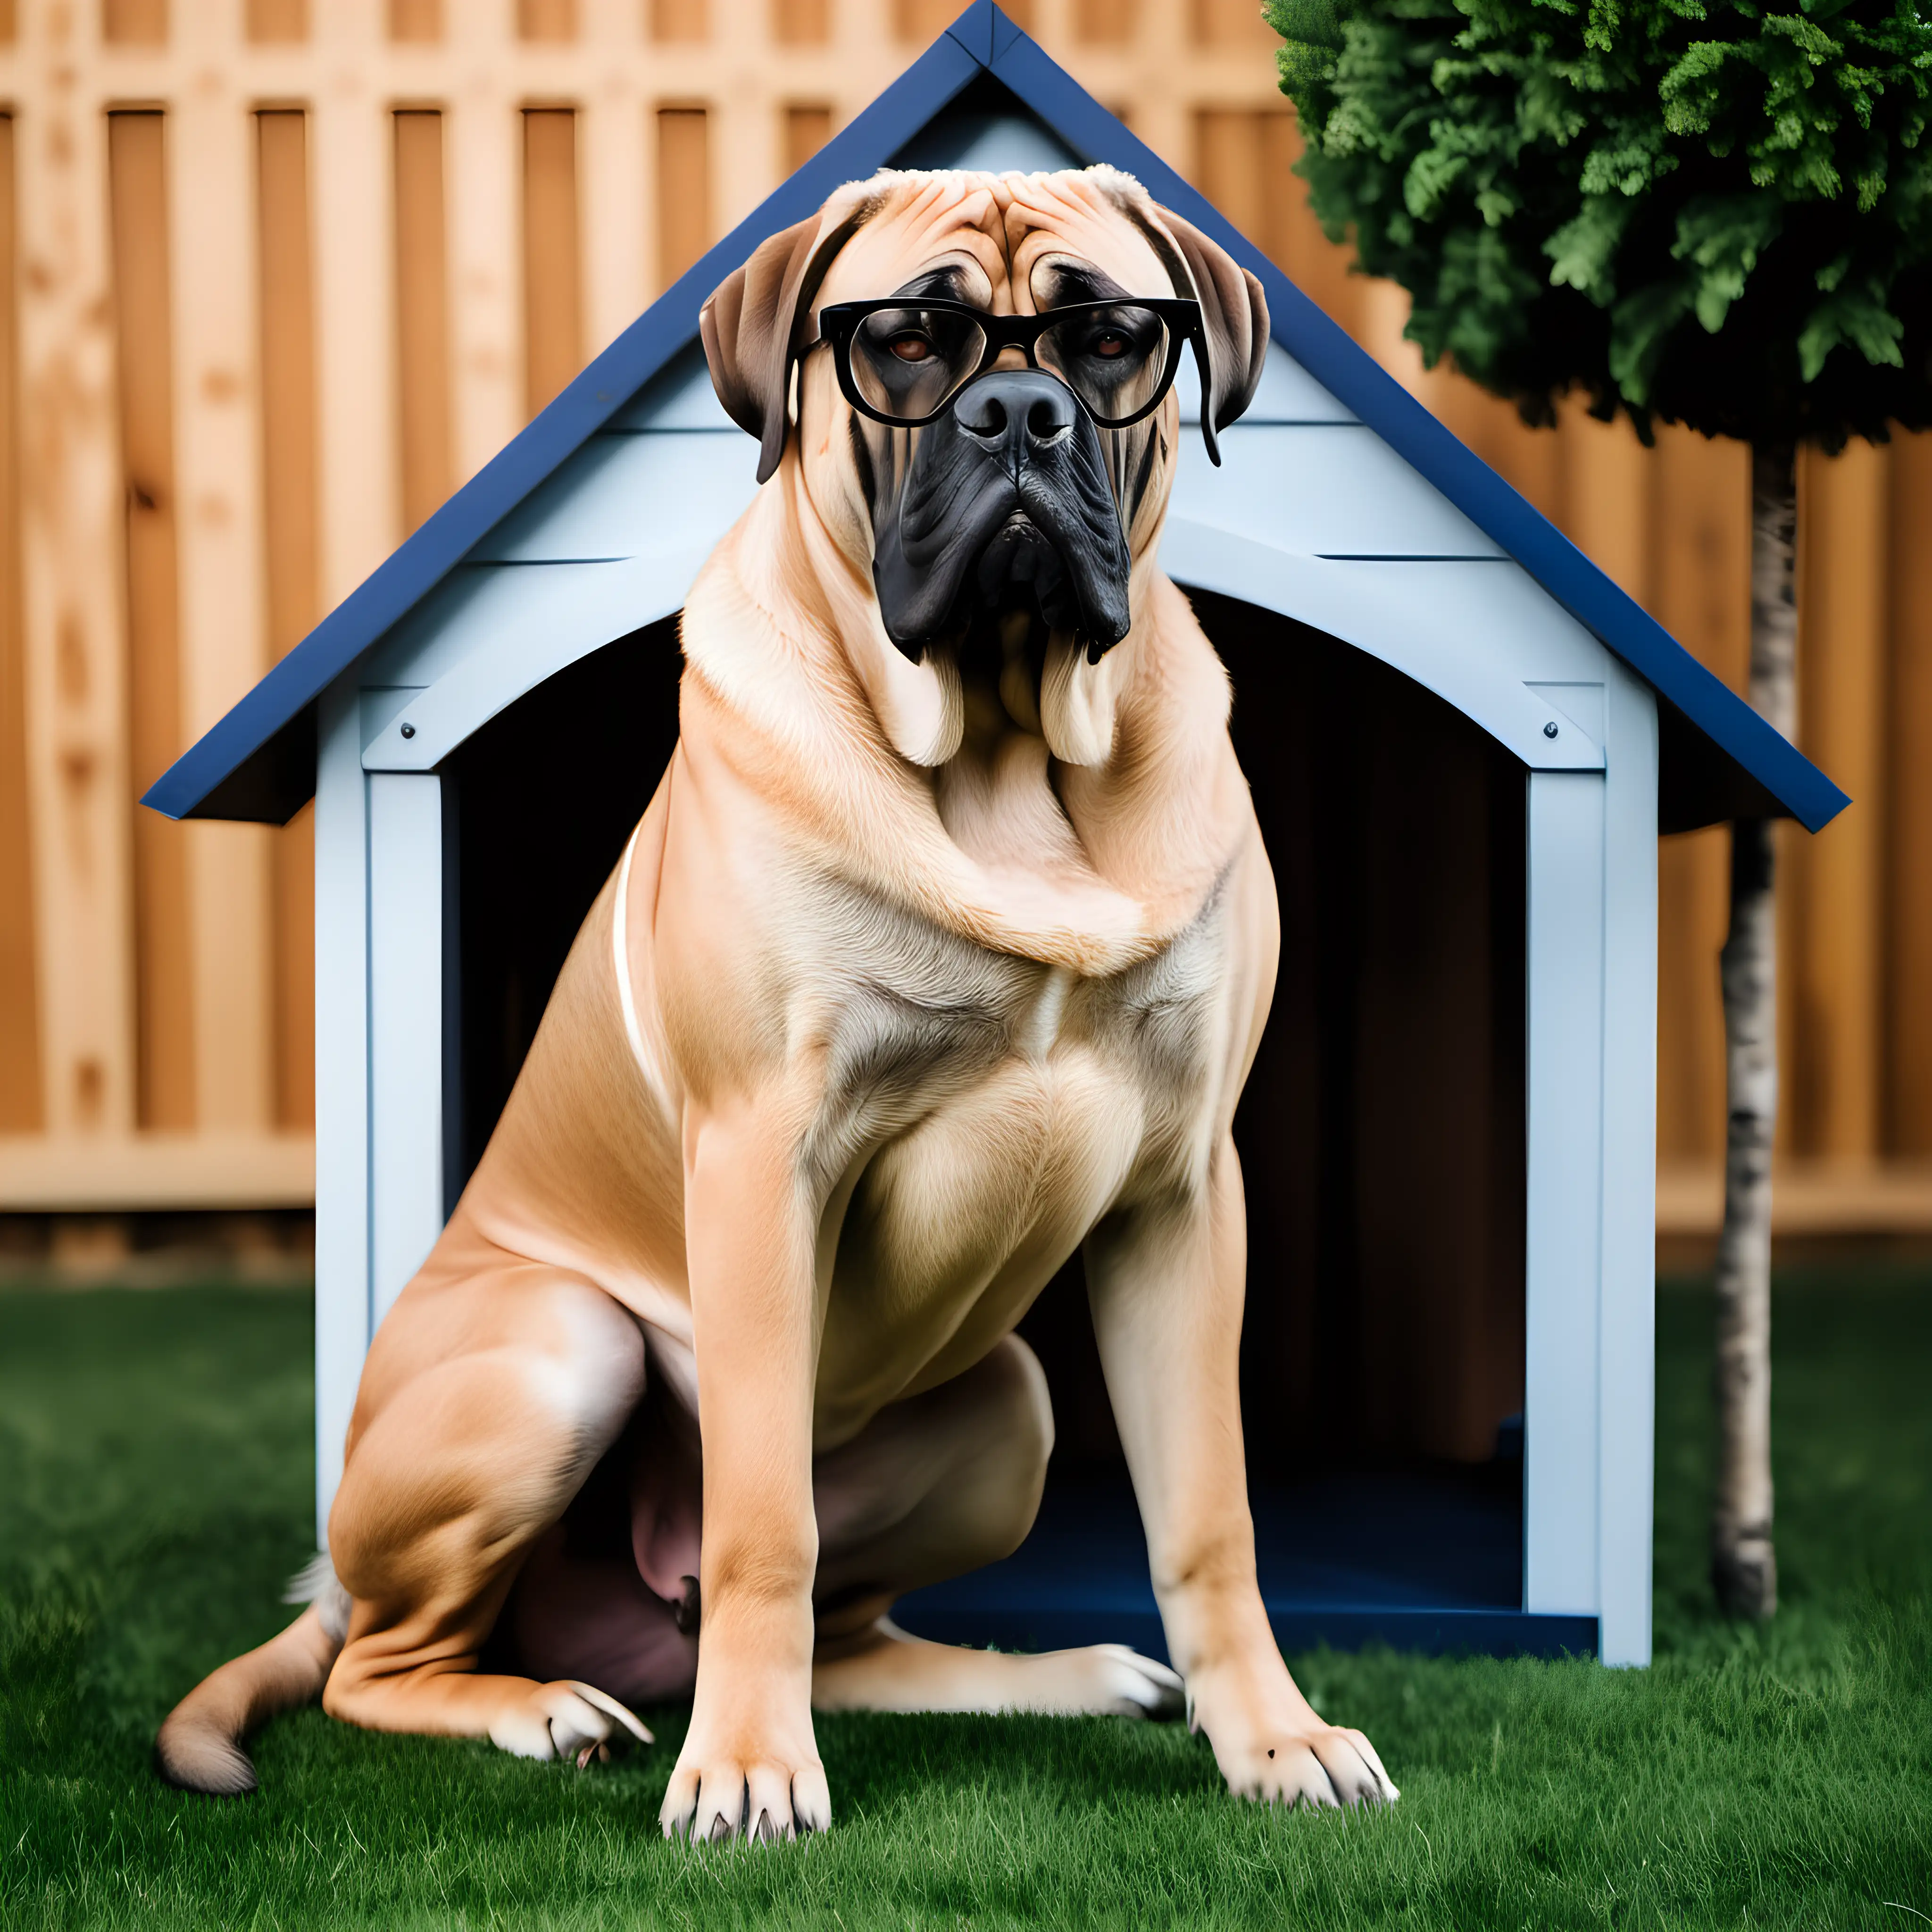 handsome bullmastiff wearing glasses with fancy dog house in background

